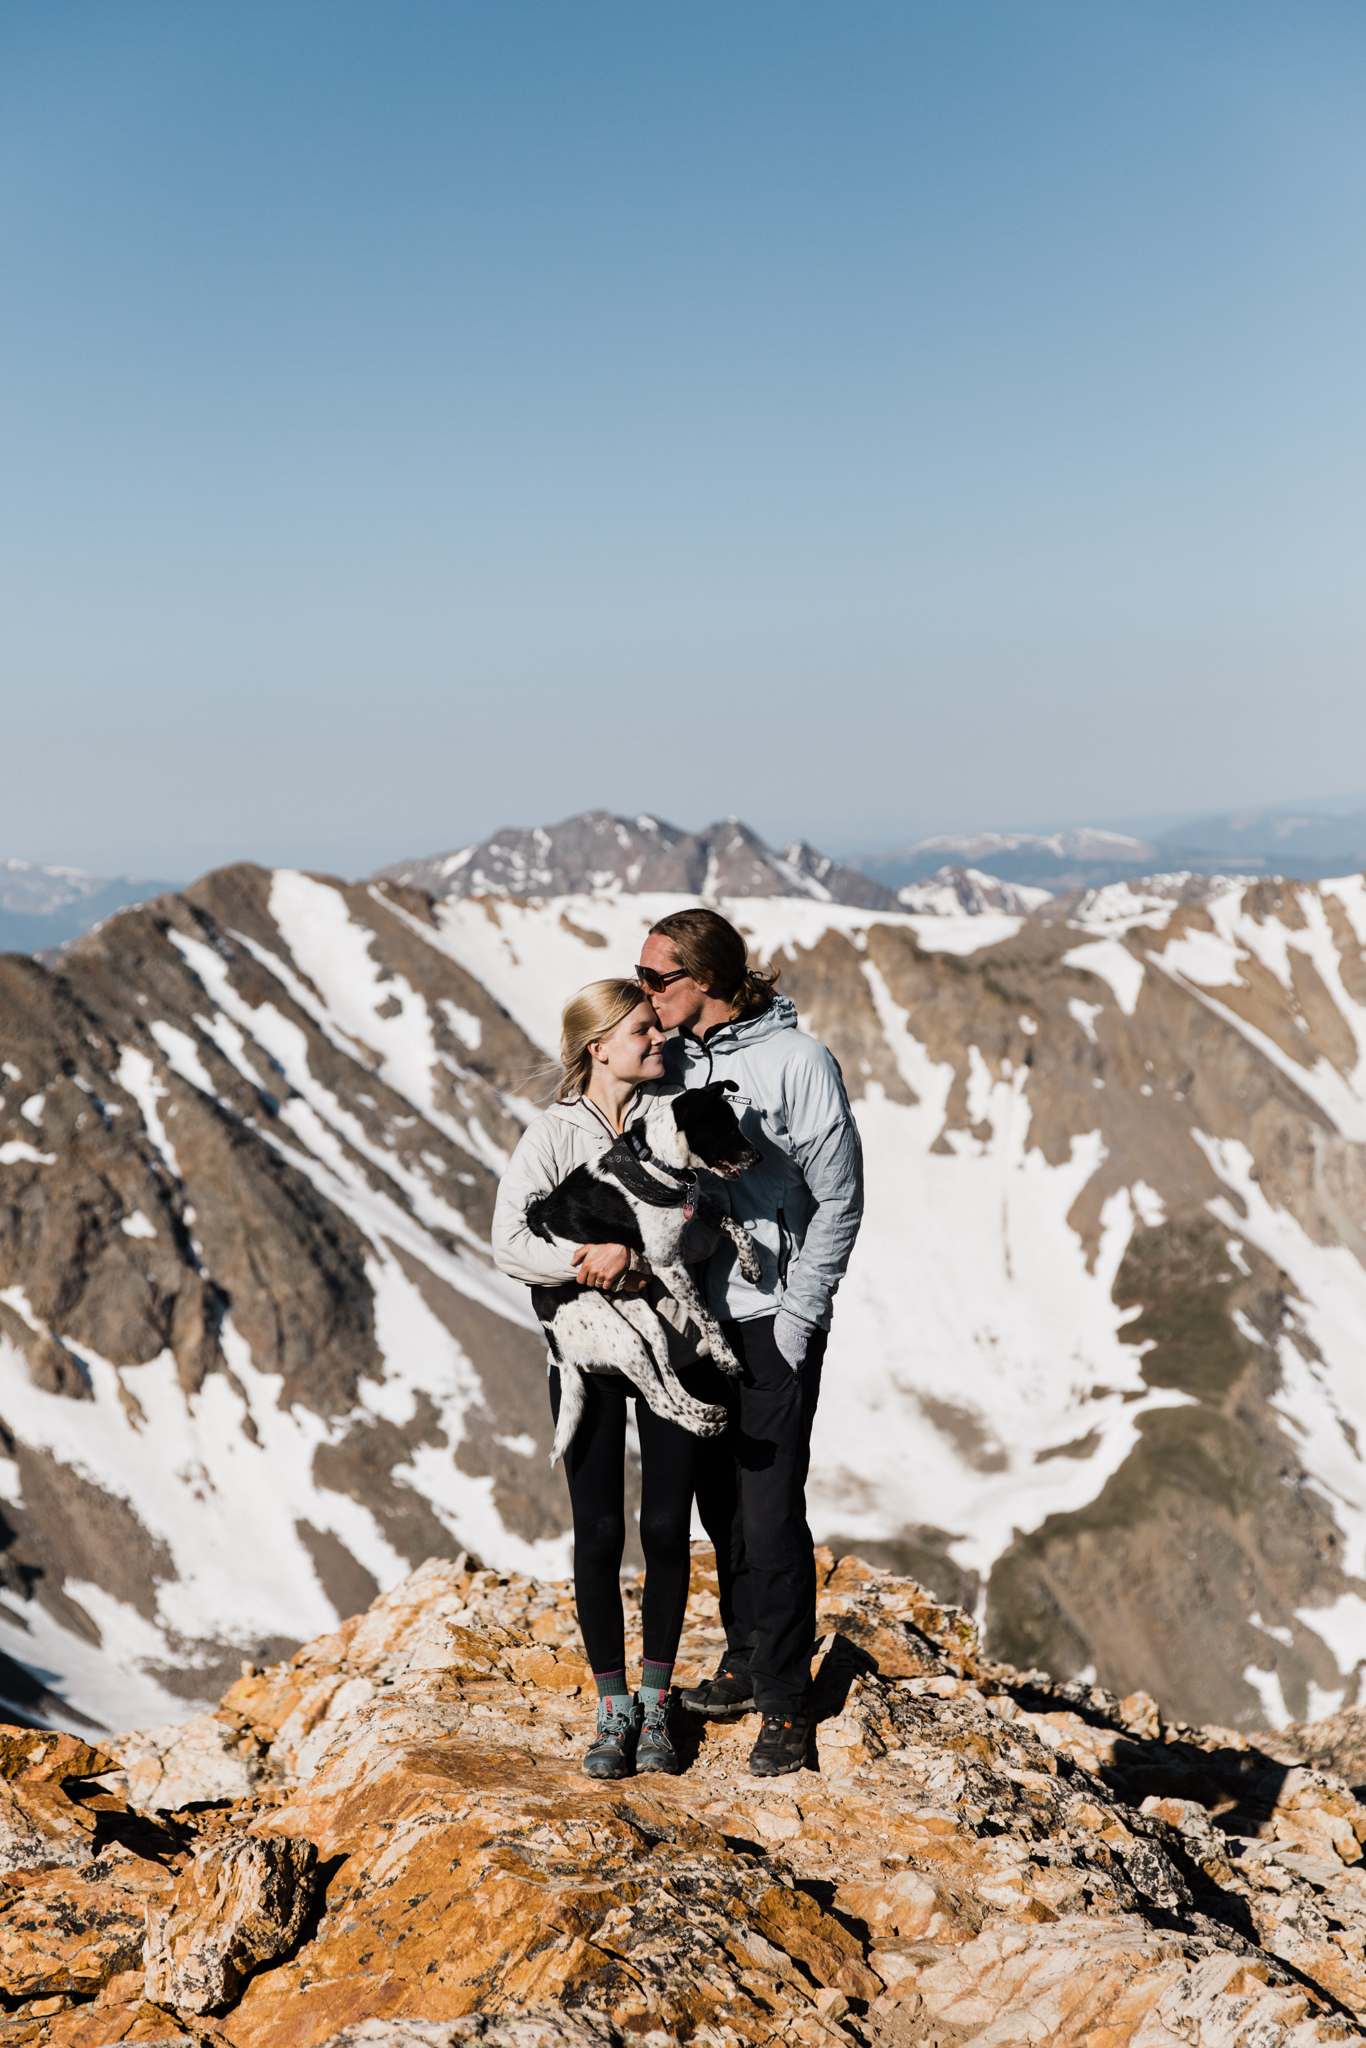 climbing mountains in colorado | utah and california adventure elopement photographers | the hearnes adventure photography | www.thehearnes.com